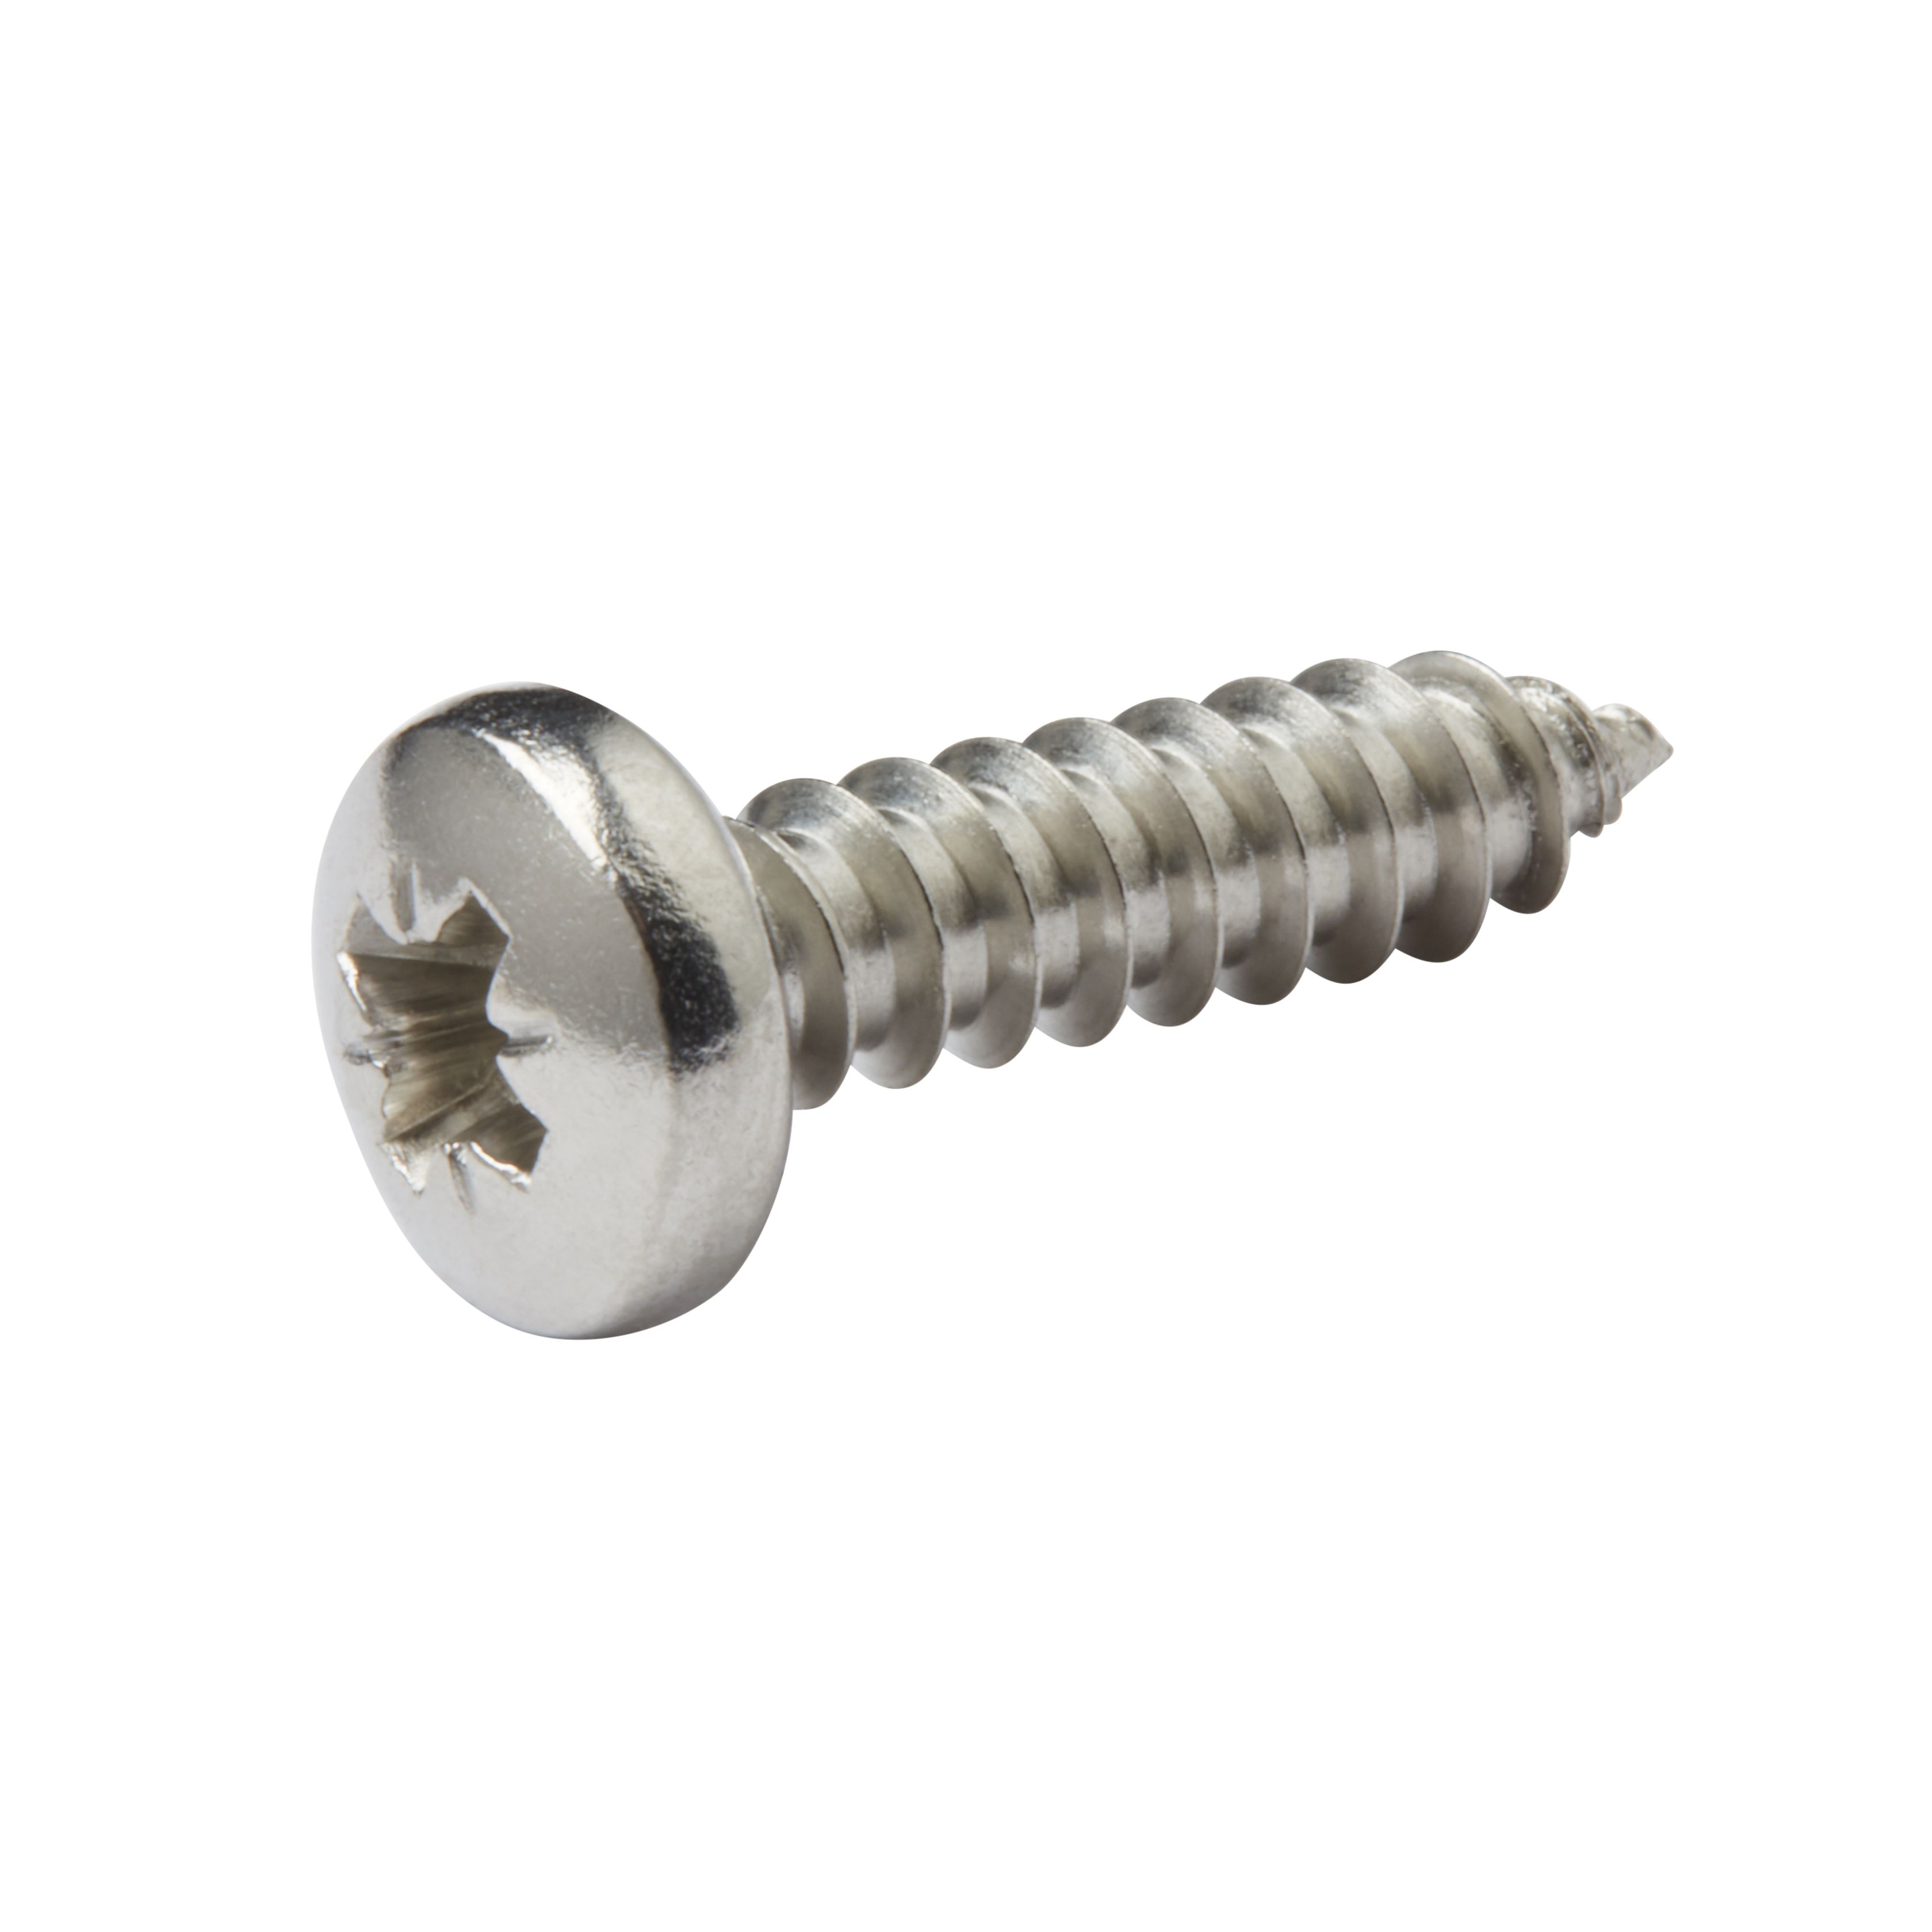 Diall Pozidriv Pan head Stainless steel Screw (Dia)4.8mm (L)19mm, Pack of 25